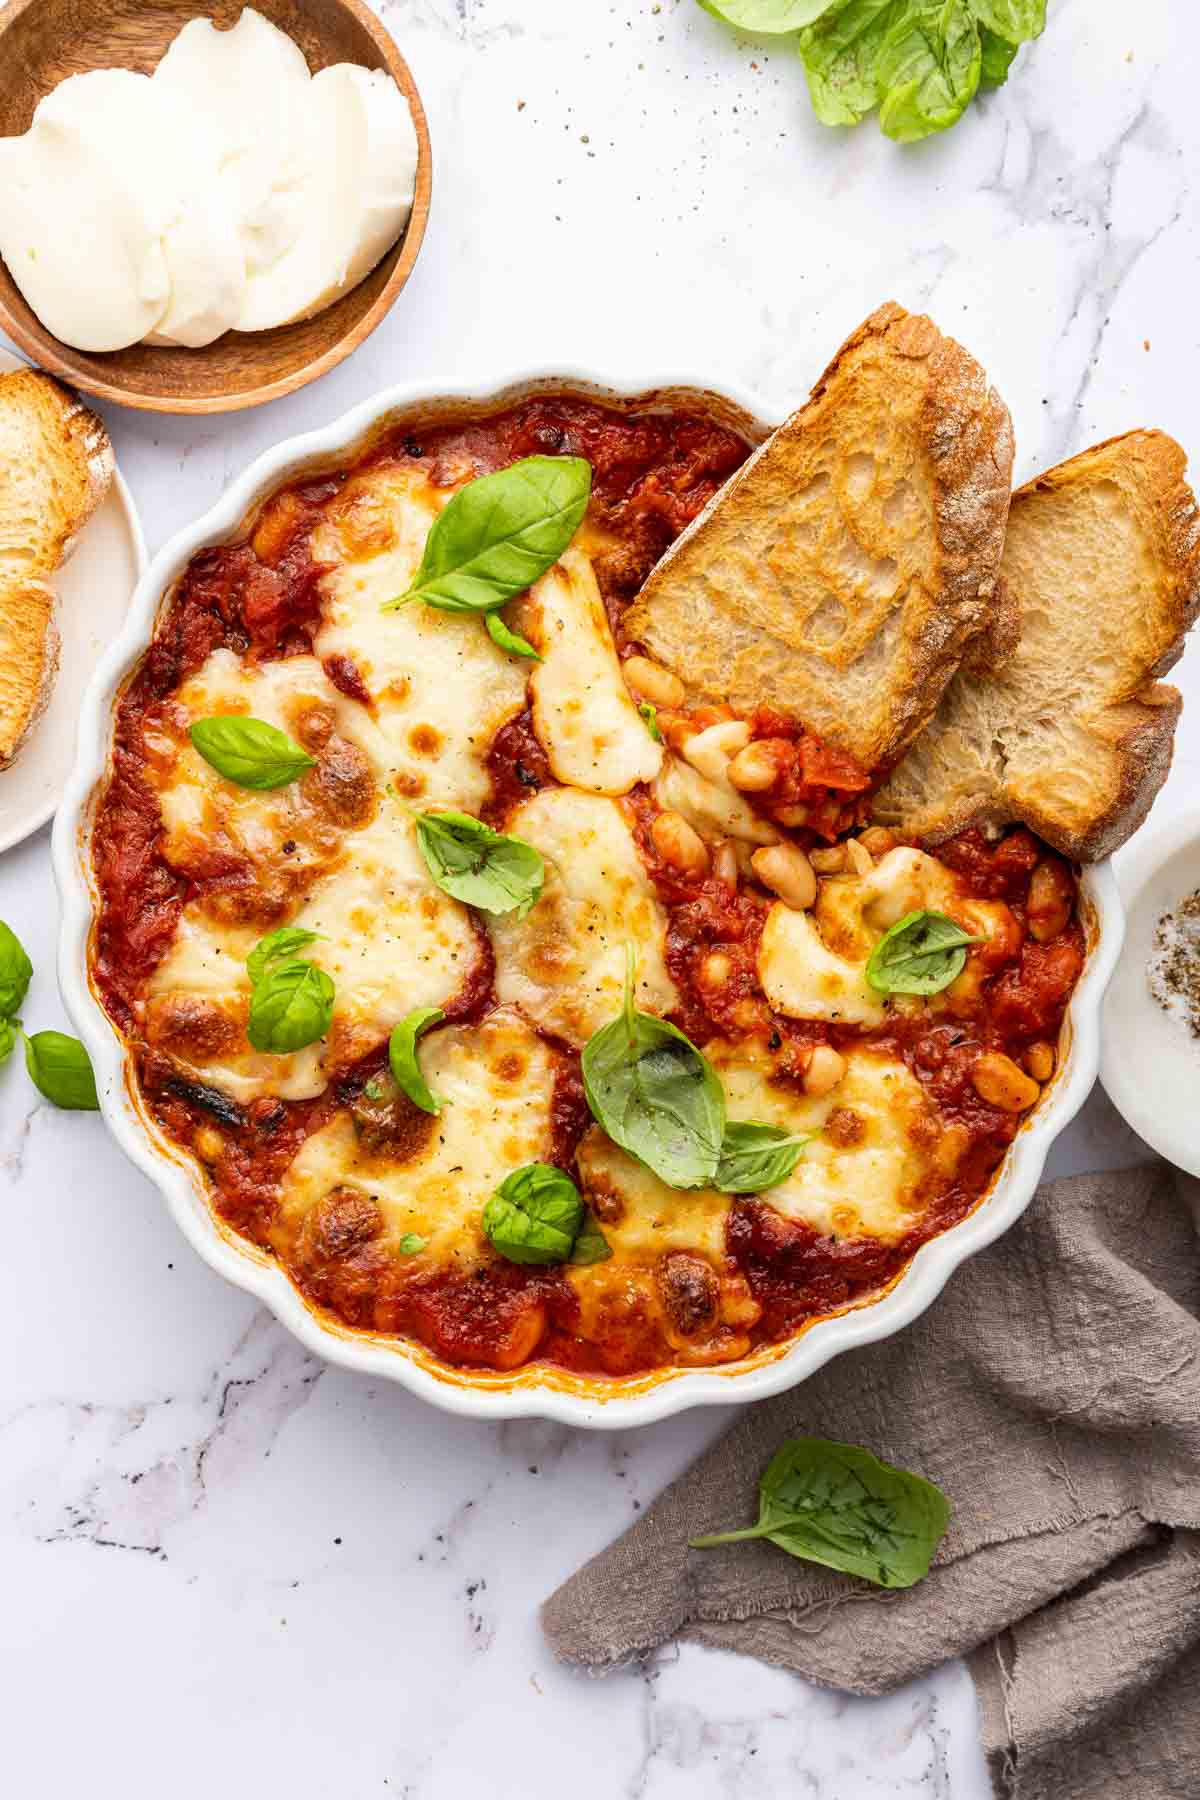 Vertical image of cheesy white bean tomato bake with sliced bread on side for serving.